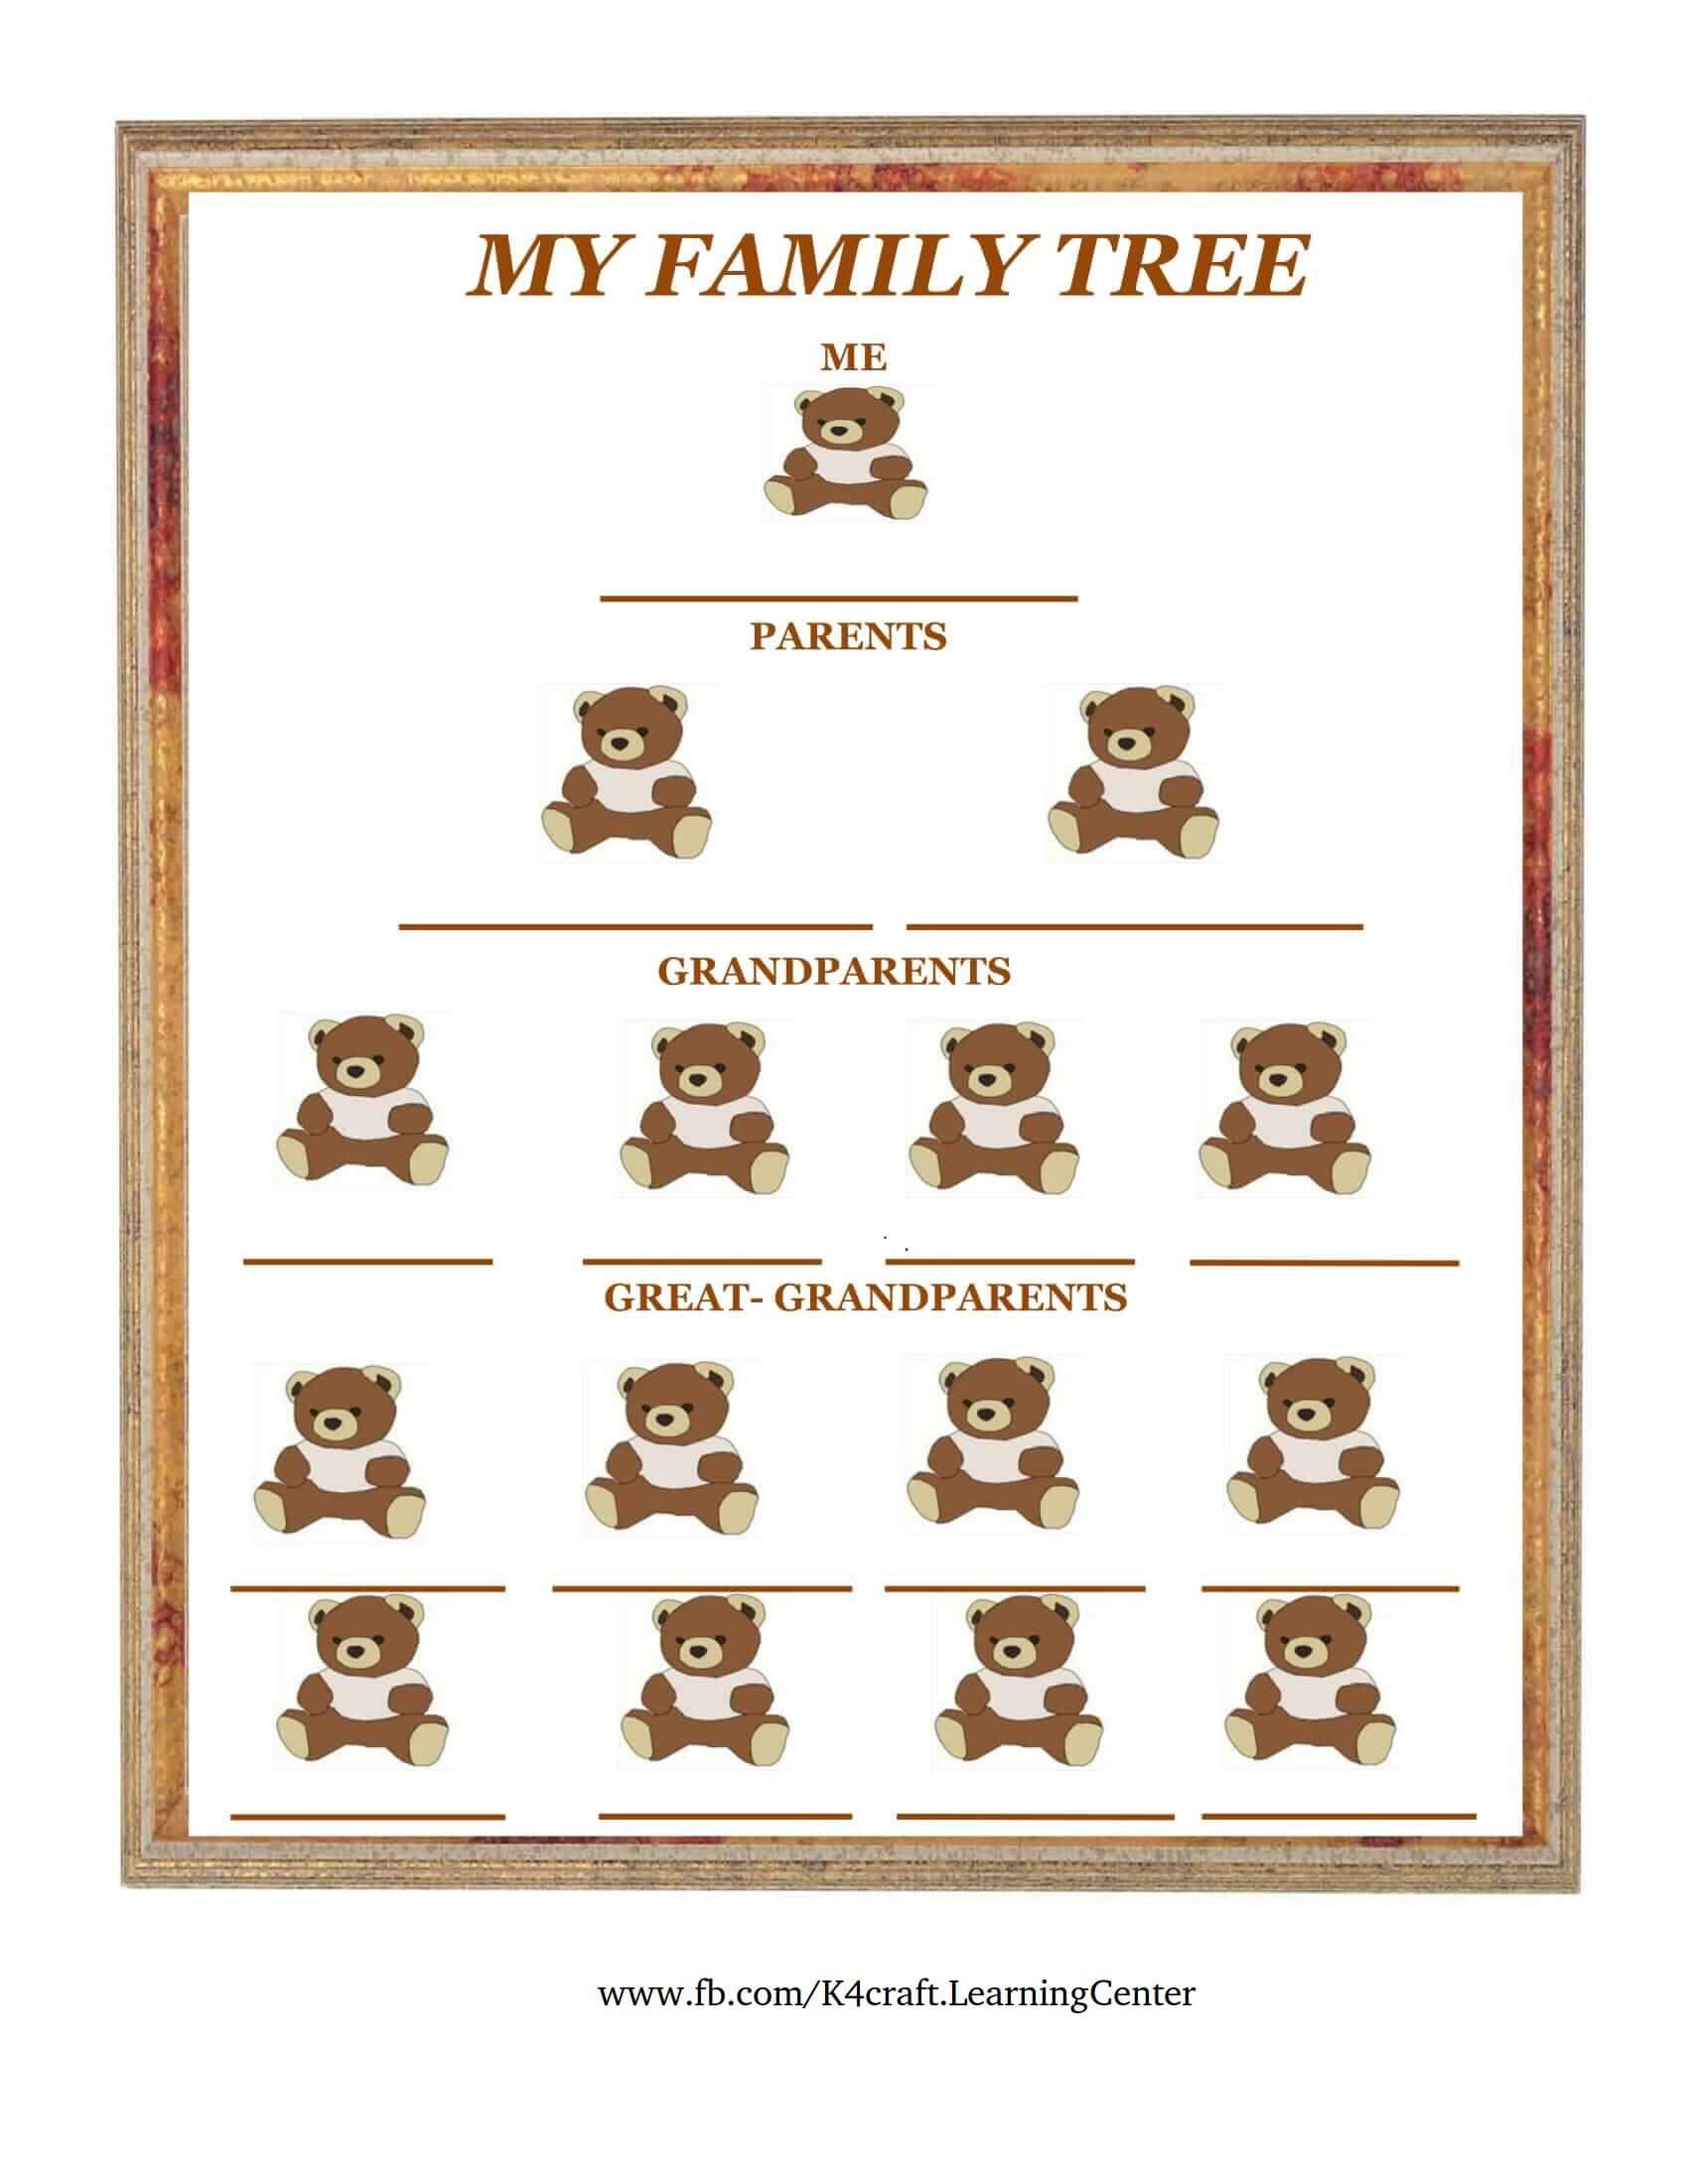 TeddyBear Family Tree Template - Children can make their own family tree with these designs 